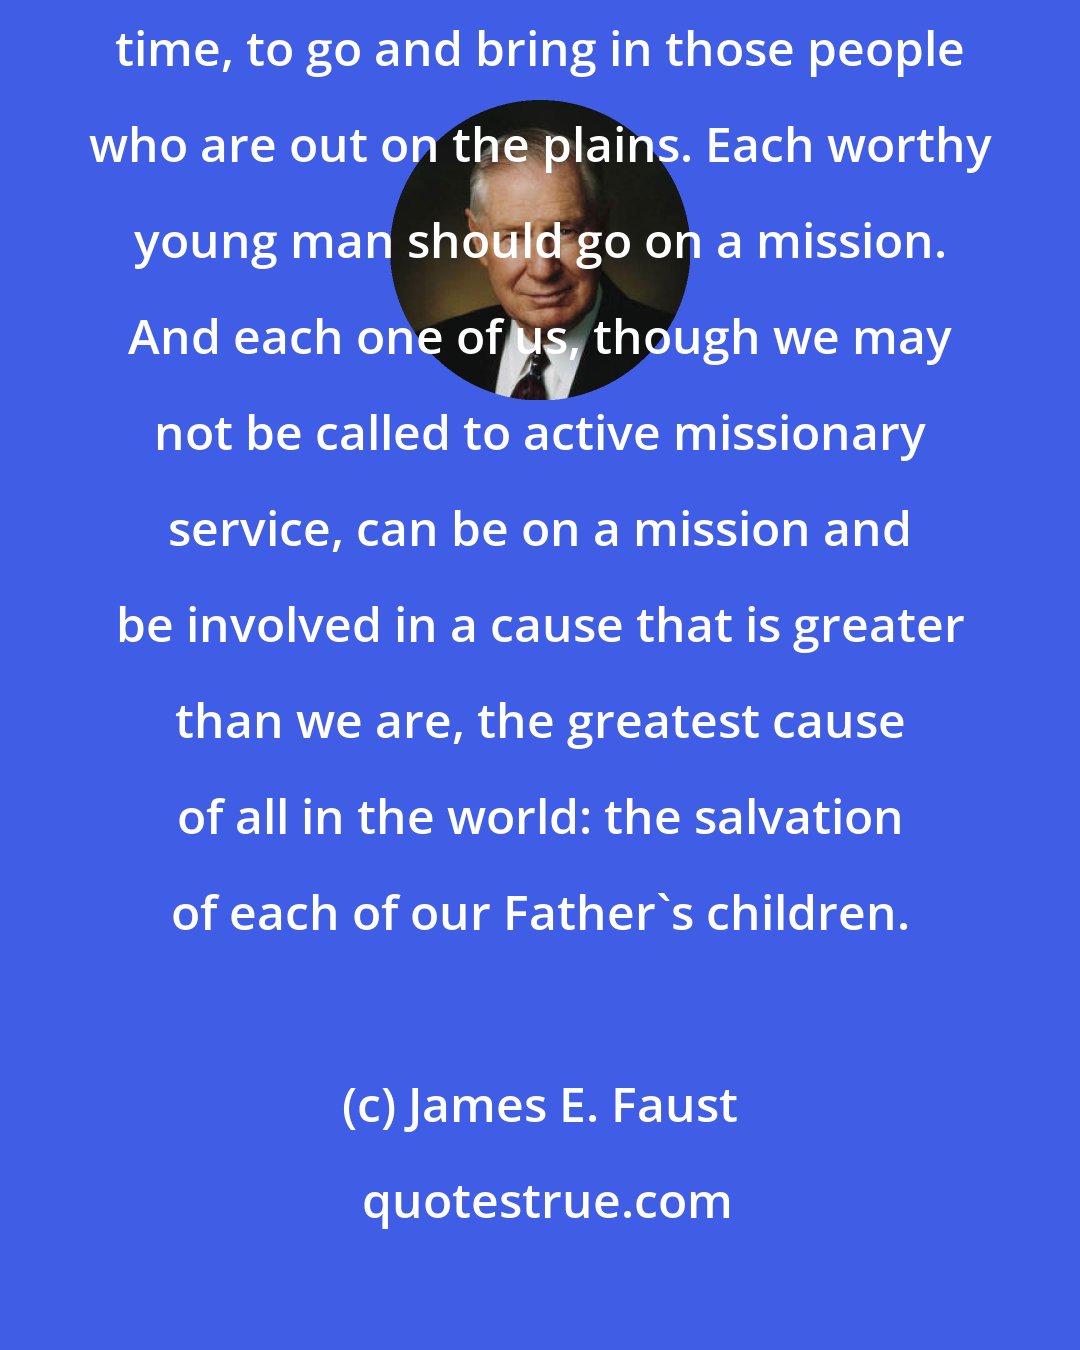 James E. Faust: Now, I think our prophet today is telling all of us, in this day and time, to go and bring in those people who are out on the plains. Each worthy young man should go on a mission. And each one of us, though we may not be called to active missionary service, can be on a mission and be involved in a cause that is greater than we are, the greatest cause of all in the world: the salvation of each of our Father's children.